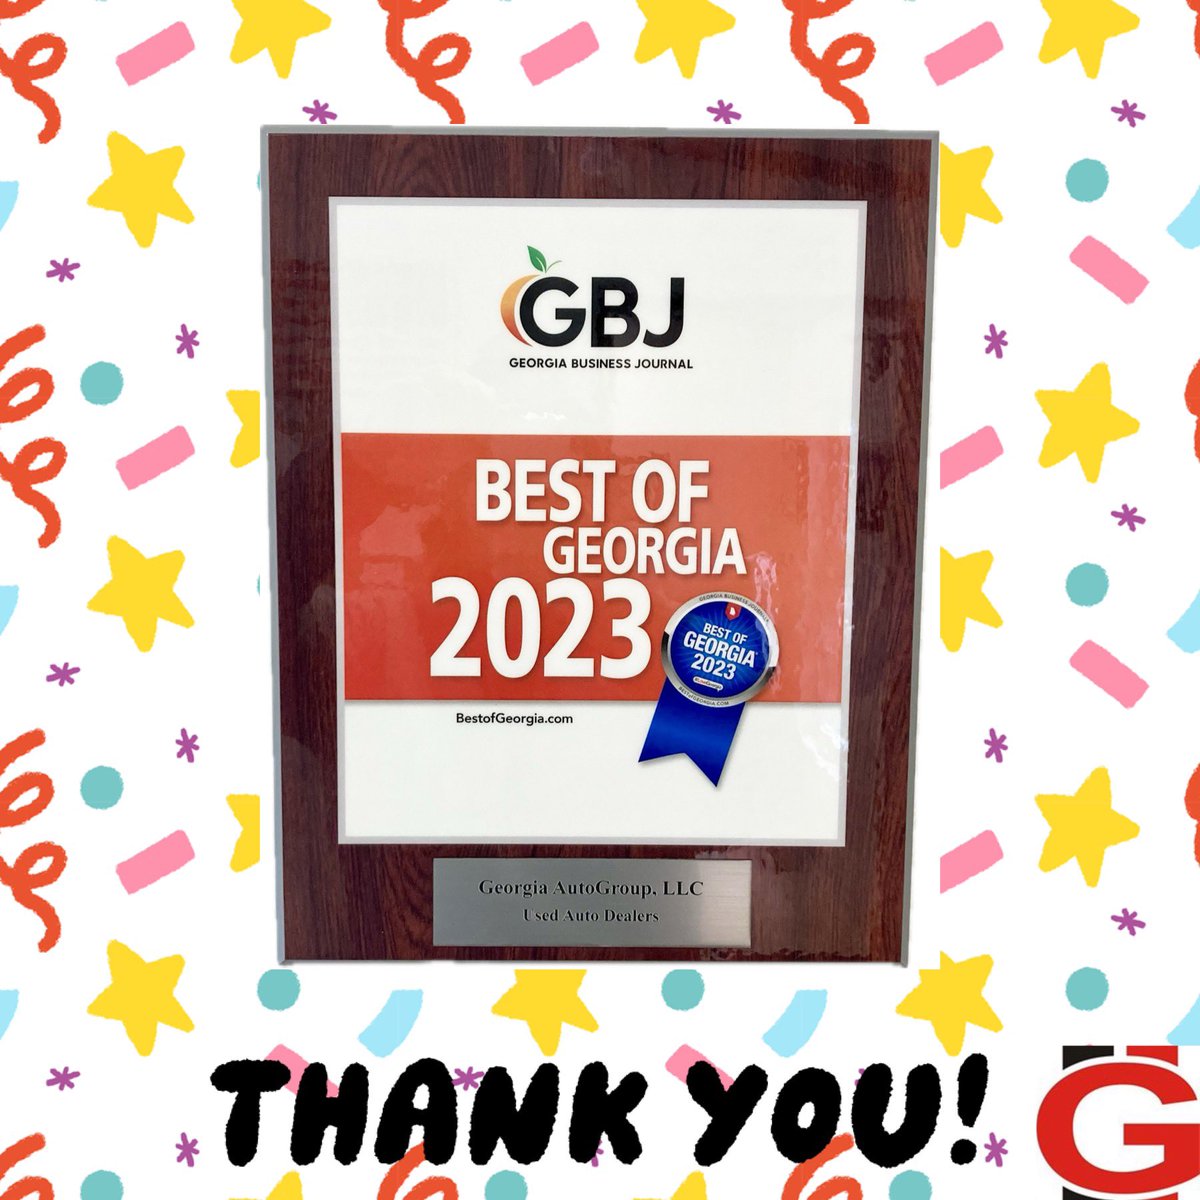 We were so grateful and honored to hang this plaque up today in the office. Thank you to all of our amazing customers! 🥳🤩
#bestofgeorgia #thankyou #GeorgiaAutoGroup